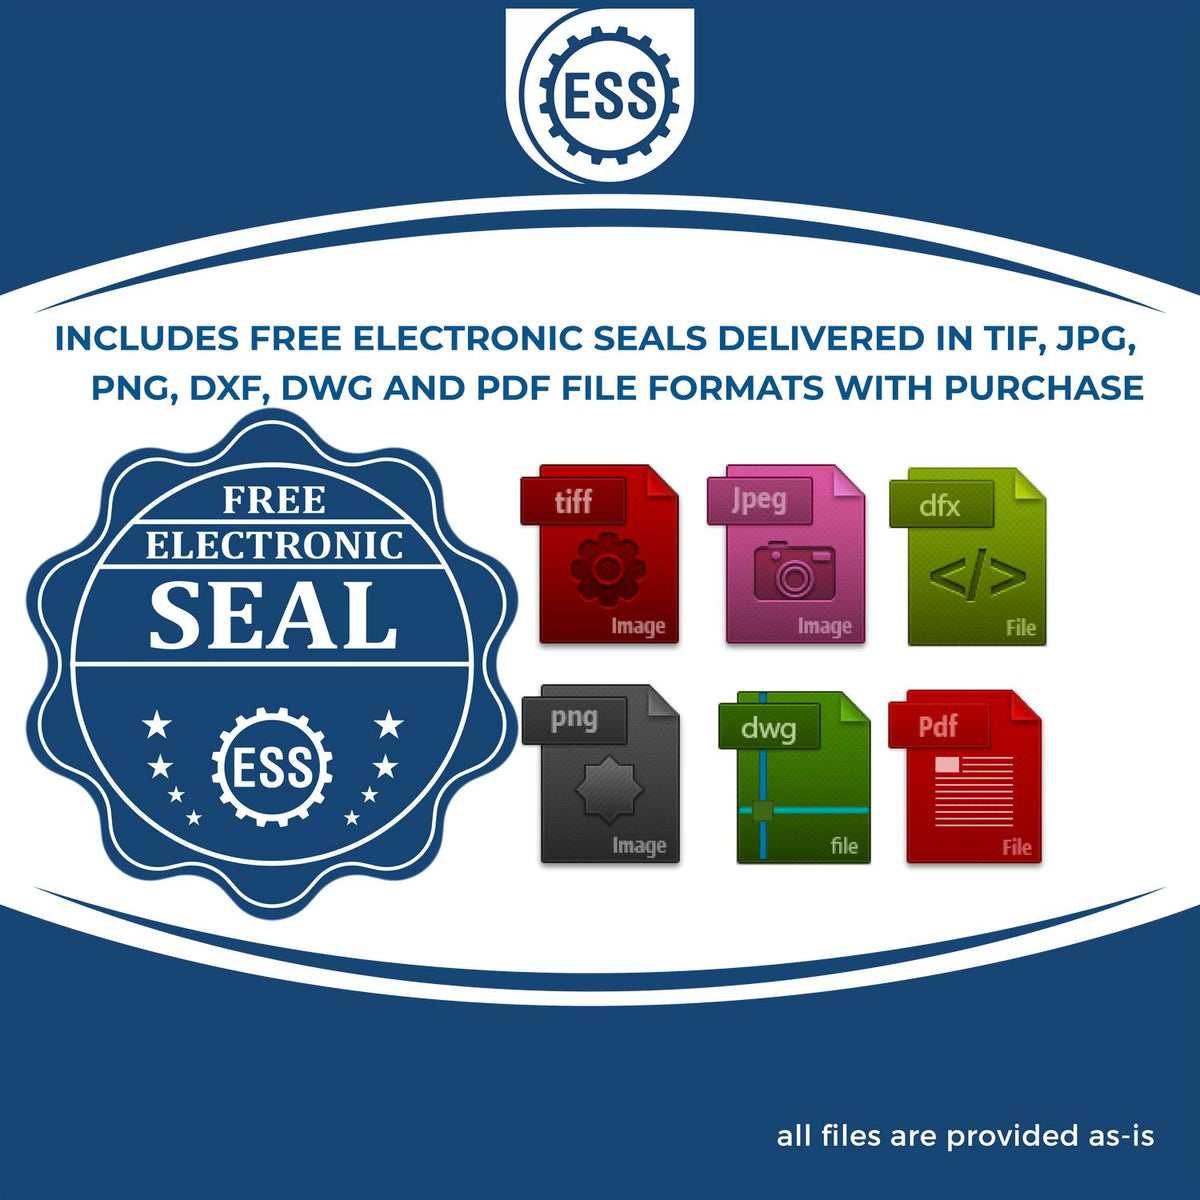 An infographic for the free electronic seal for the MaxLight Premium Pre-Inked Puerto Rico Rectangular Notarial Stamp illustrating the different file type icons such as DXF, DWG, TIF, JPG and PNG.